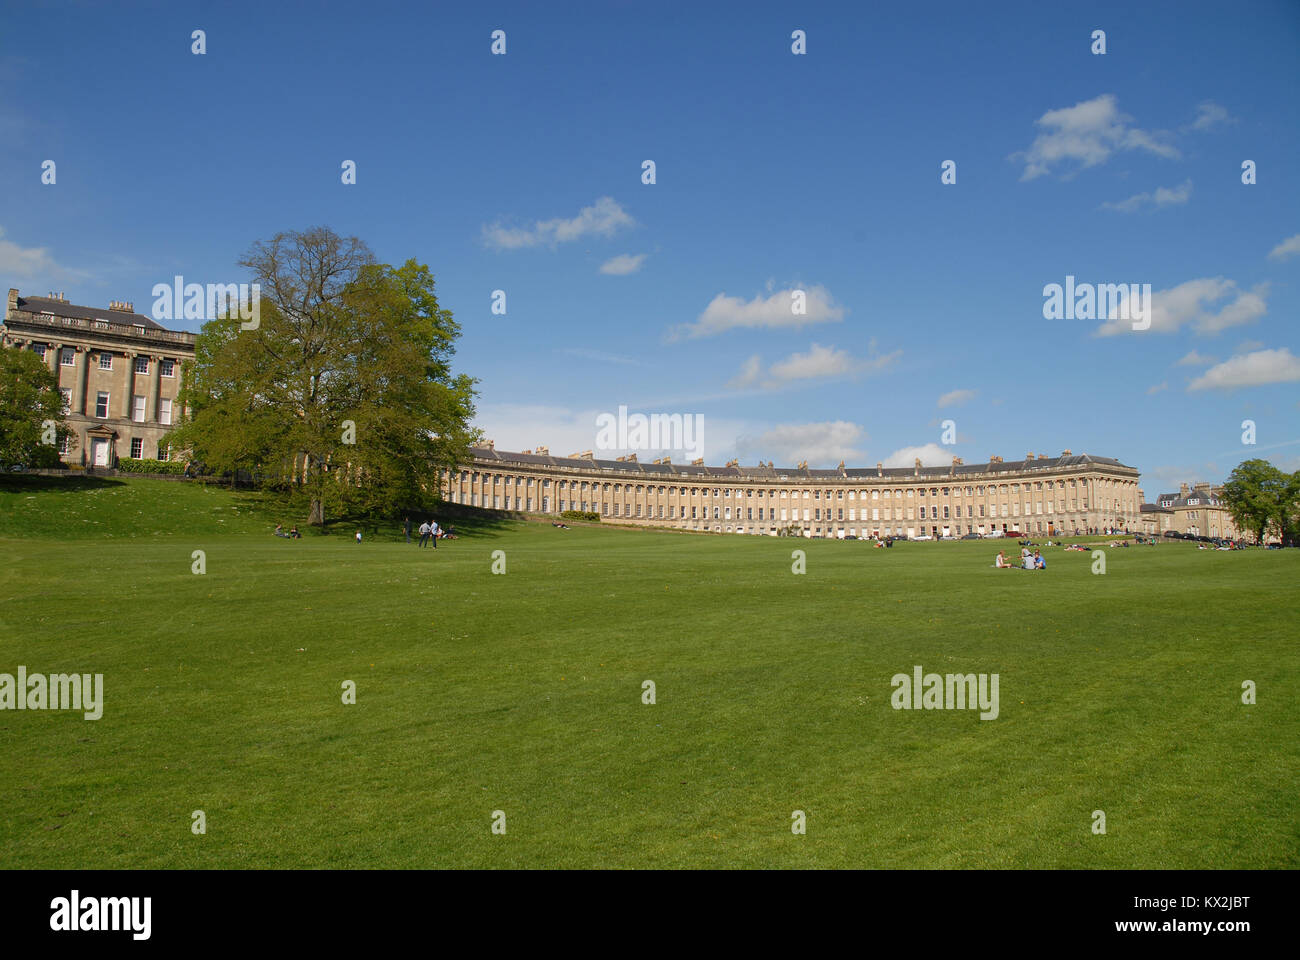 People relaxing on the lawn in front of The Royal Crescent, Bath, United Kingdom Stock Photo